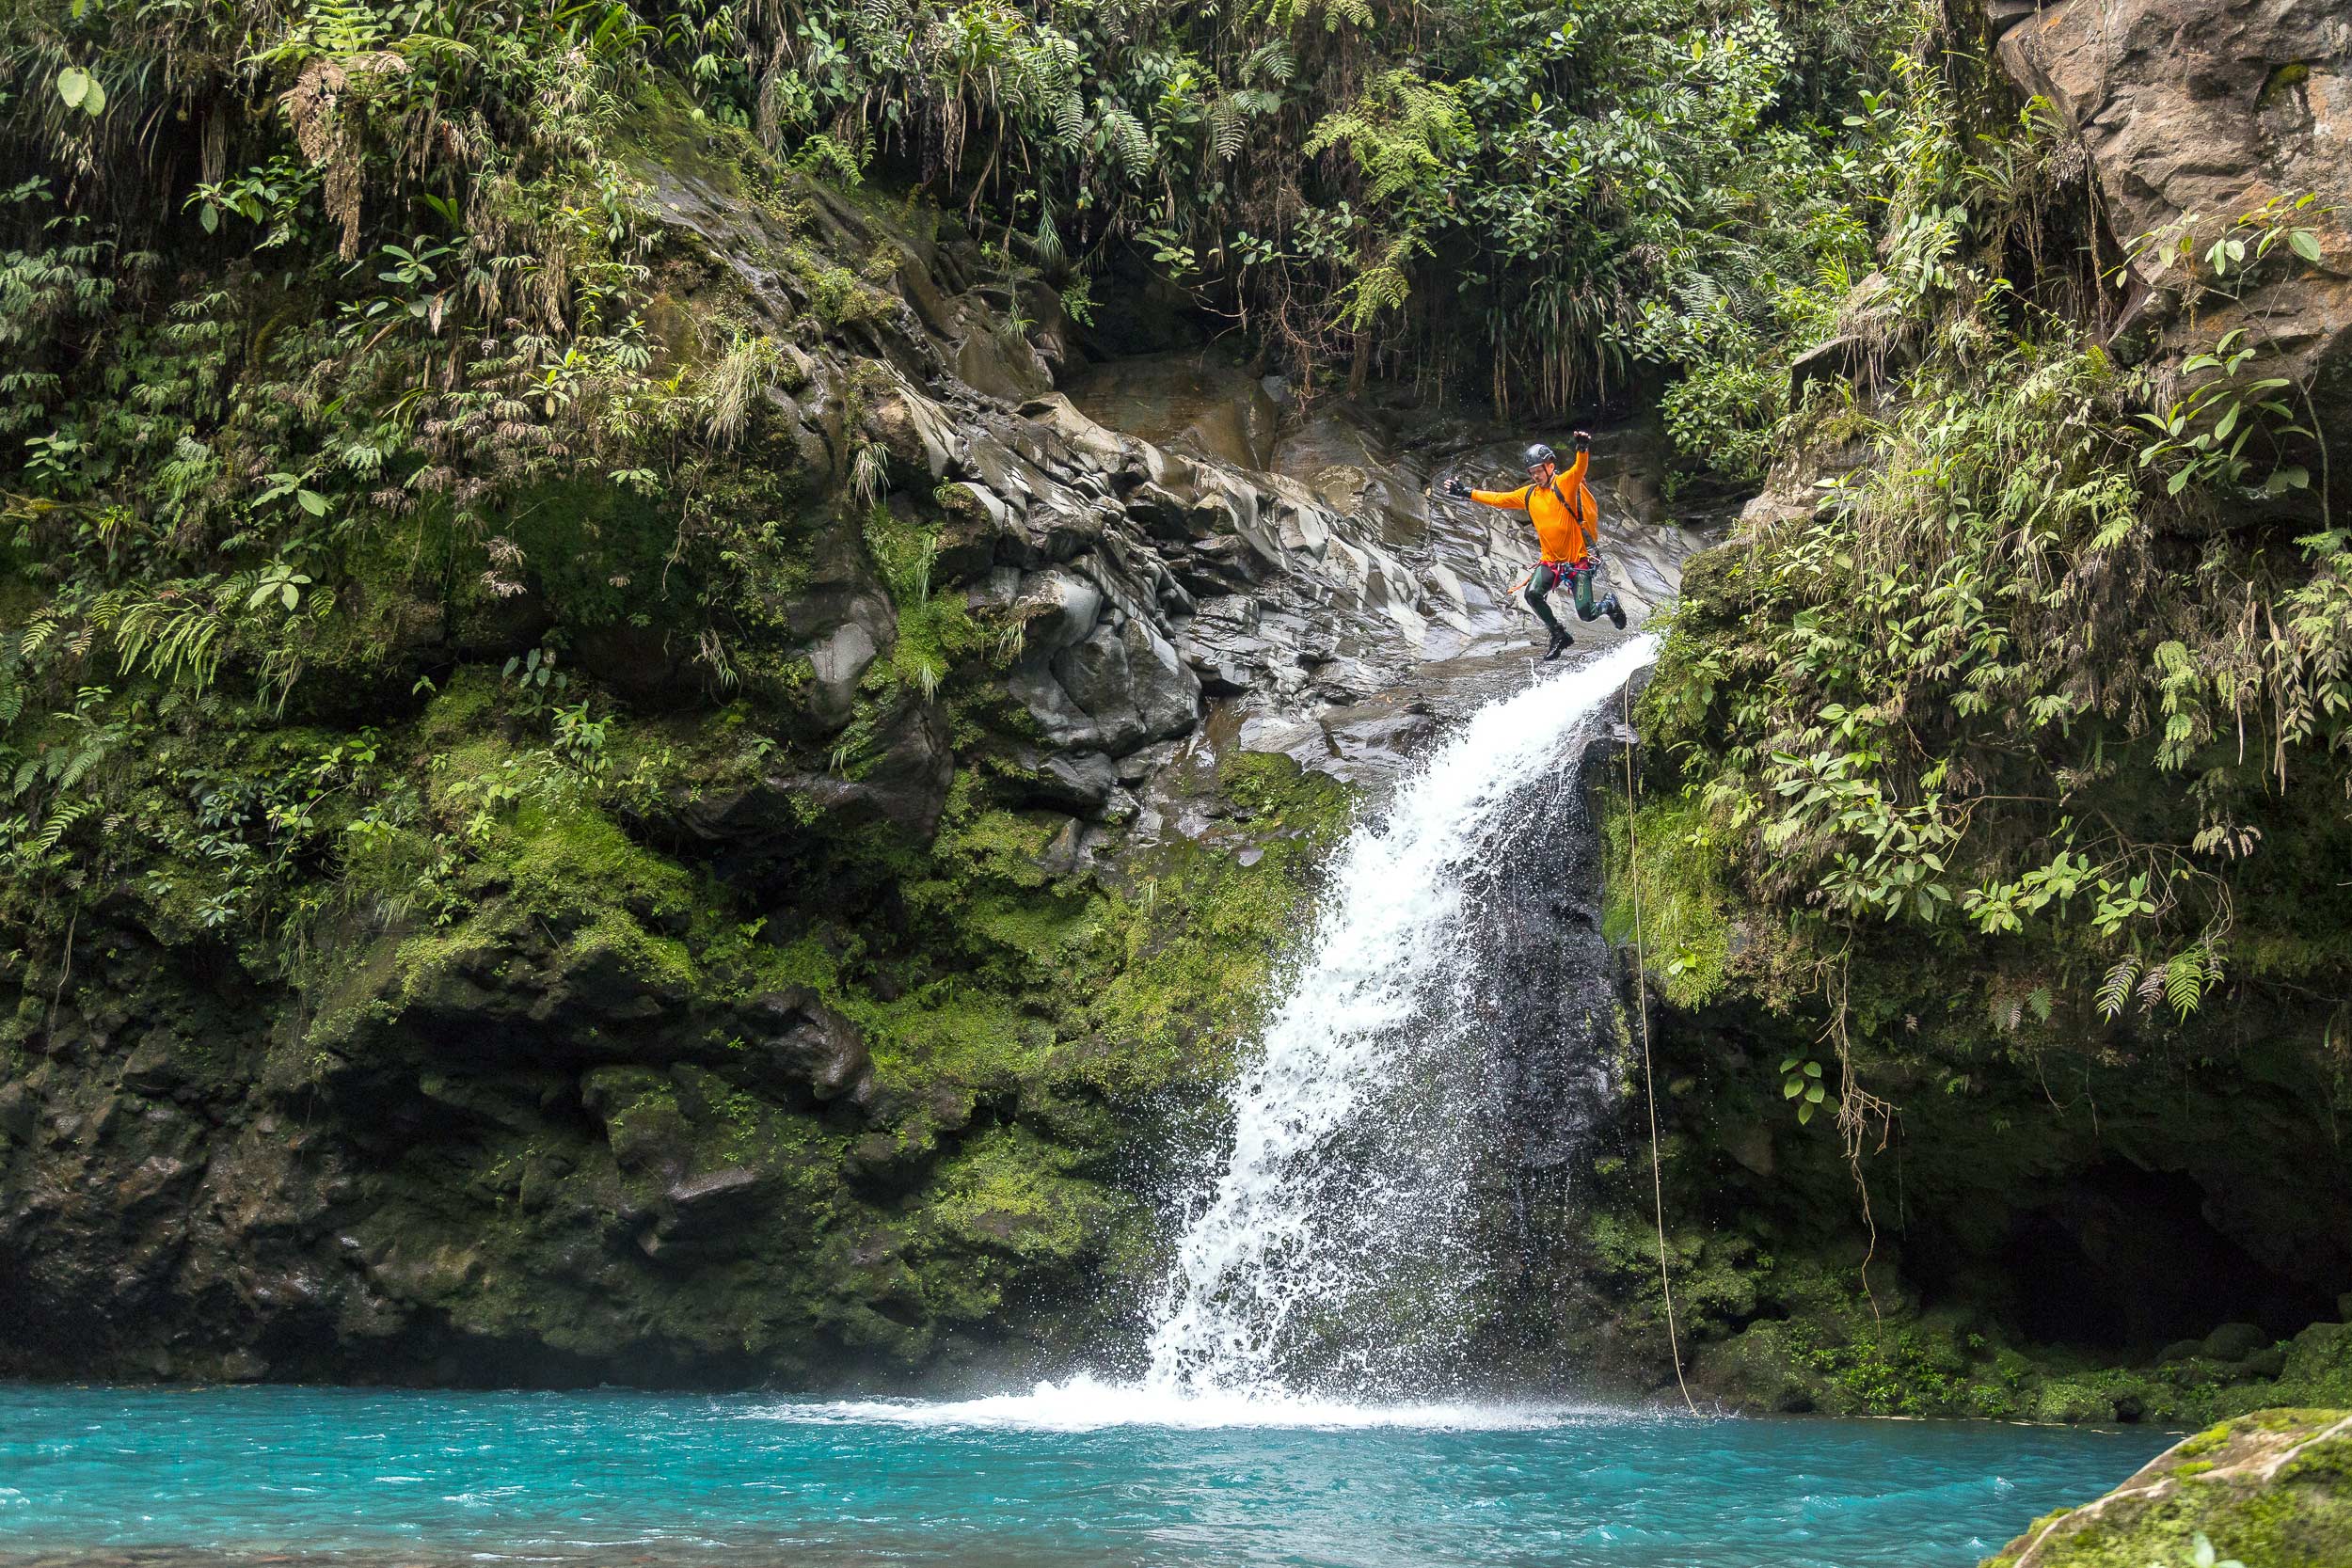 Scott jumps into one of the many emerald pools of Gata Fiera canyon. Photo: Victor Hugo Carvajal